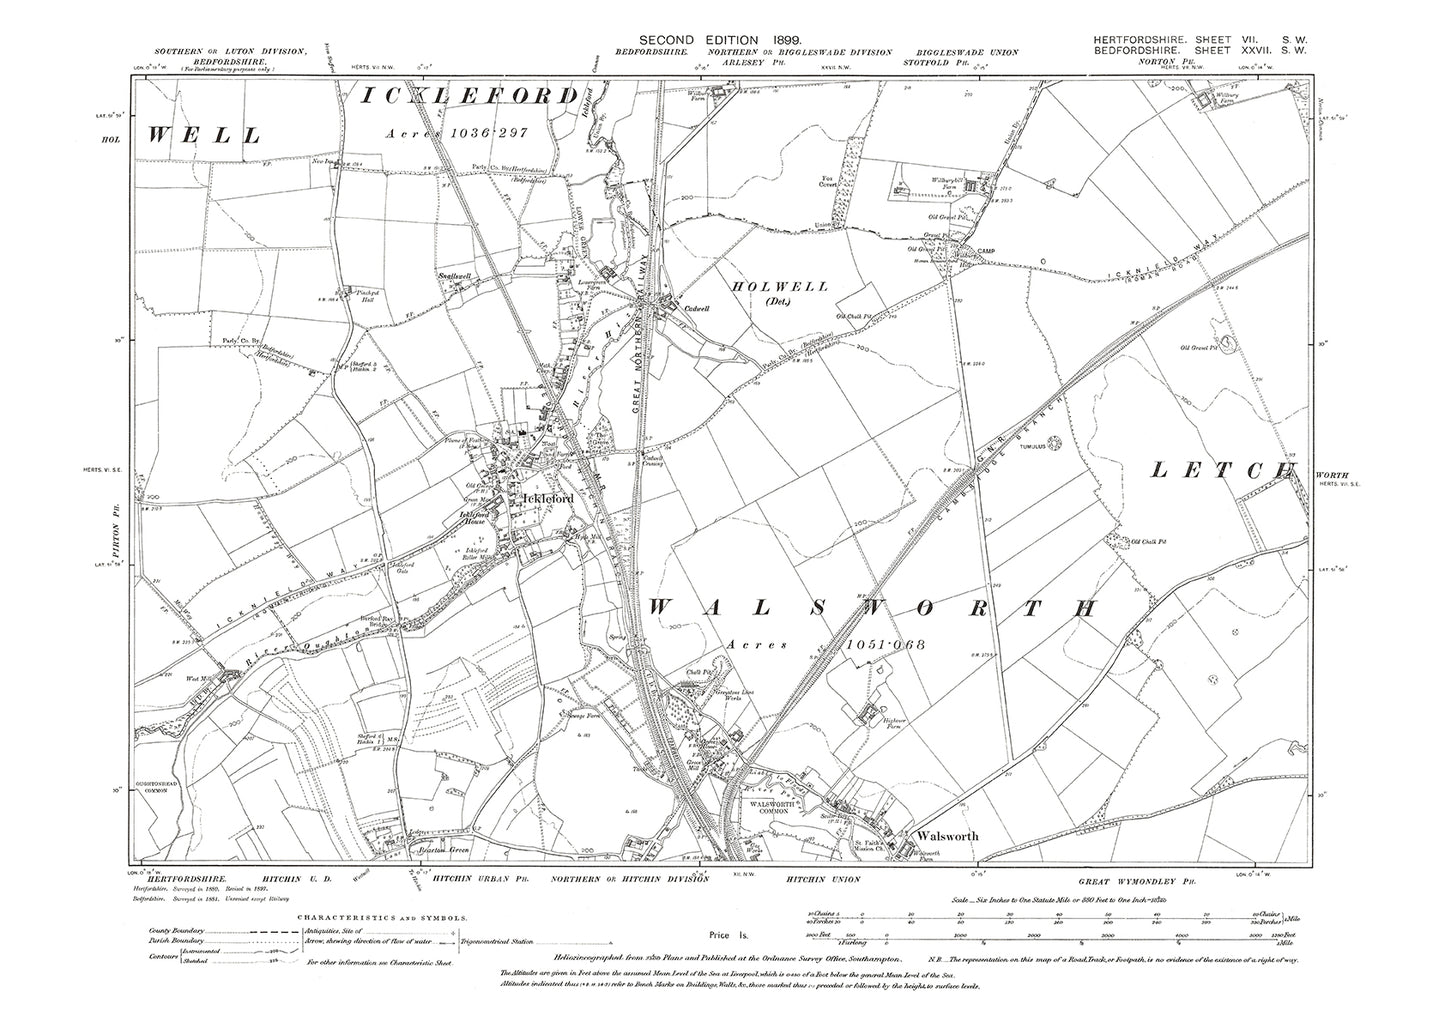 Old OS map dated 1899, showing Ickleford, Walsworth (north) in Hertfordshire - 7SW